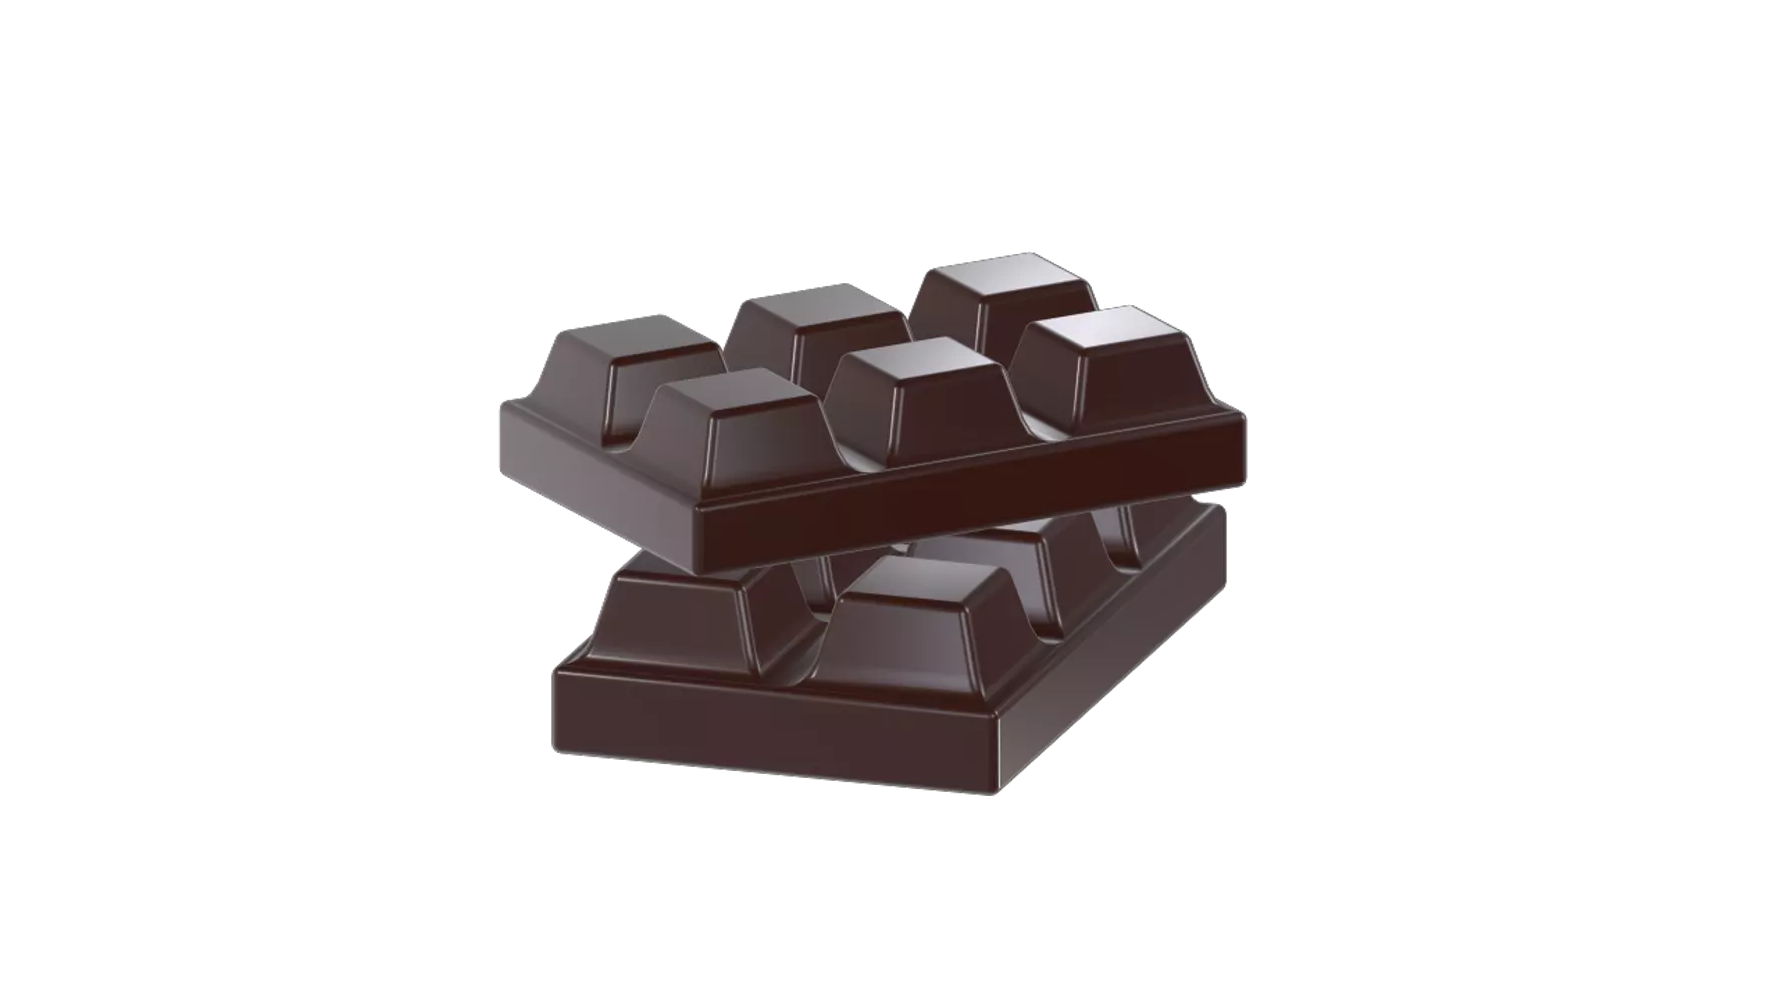 Two Chocolate Bar 3D Graphic